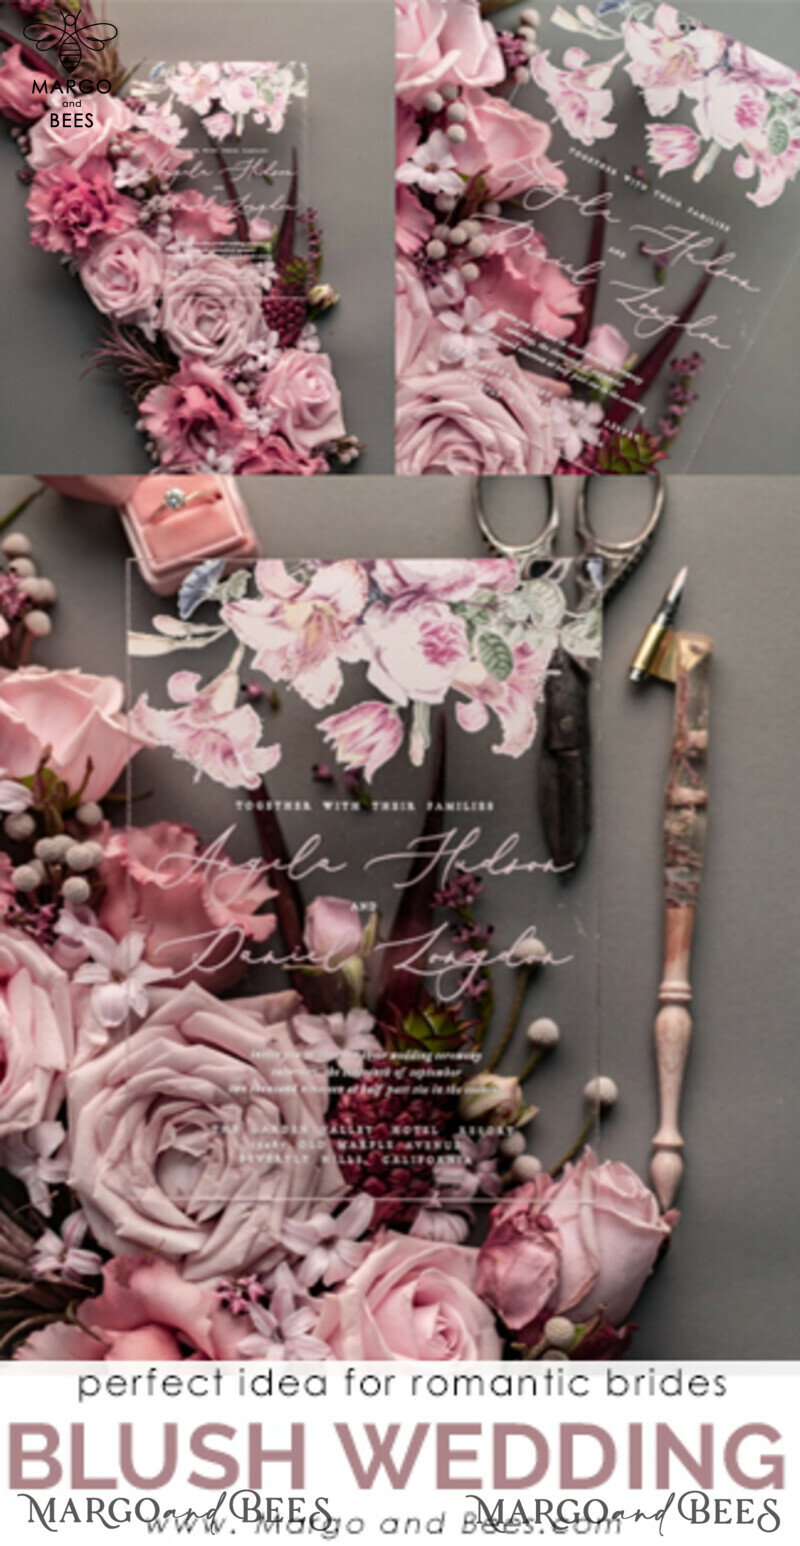 Luxury Floral Acrylic Plexi Wedding Invitations: Exquisite Blush Pink Designs

Romantic Blush Pink Wedding Invites: A Love Story in Vintage Style

Vintage Wedding Invitation Suite: Timeless Elegance and Handmade Craftsmanship

Elegant and Handmade Wedding Cards: Luxurious Floral Acrylic Plexi Invitations-34